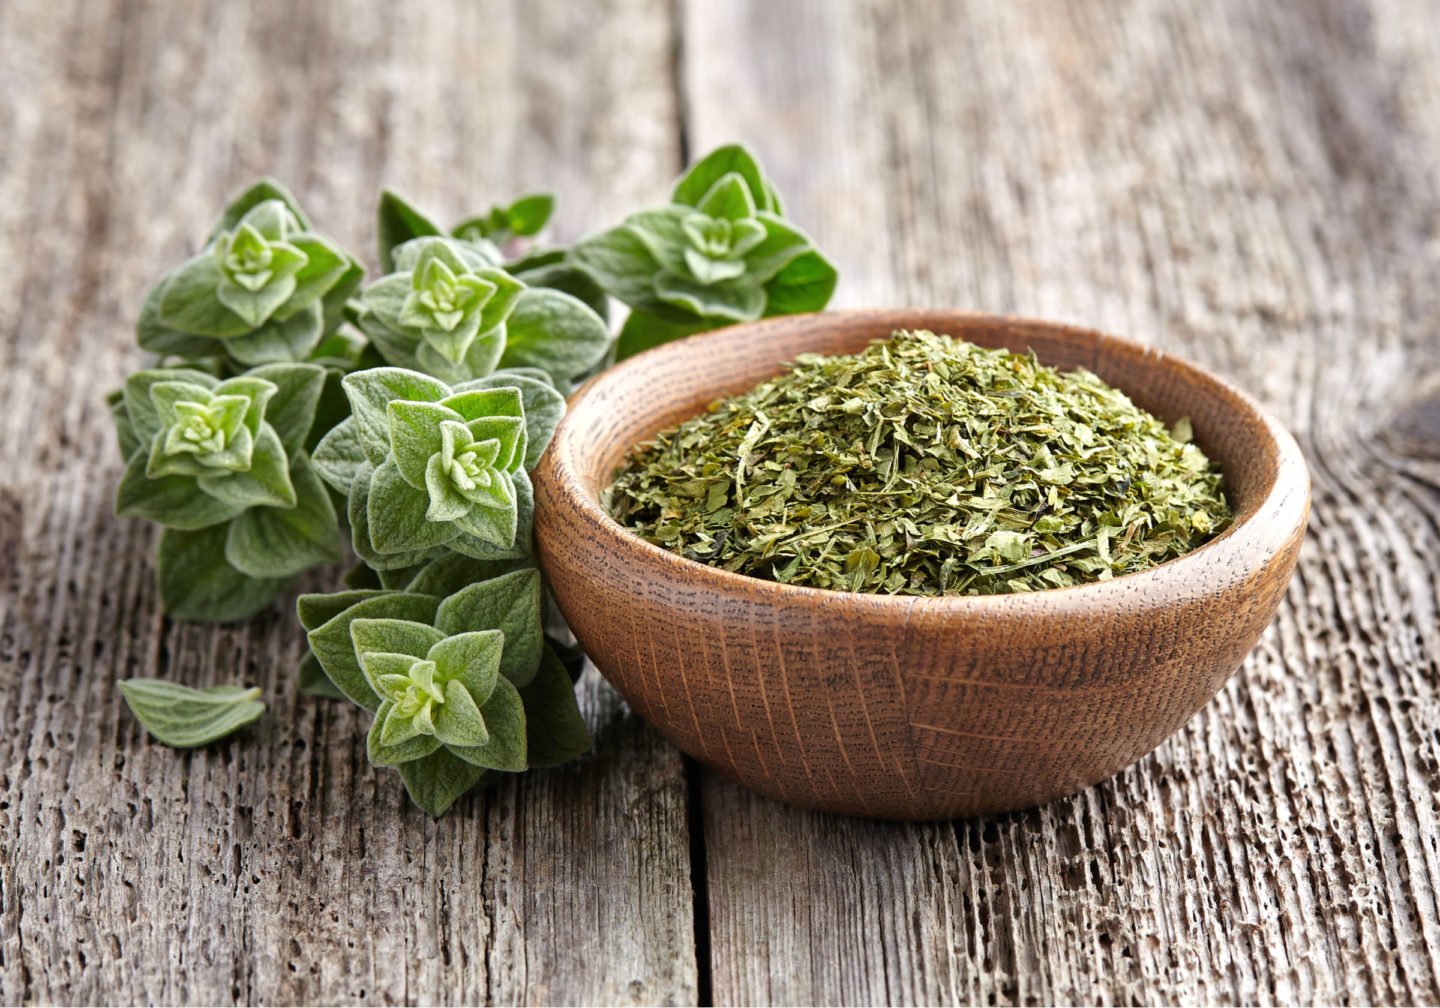 either fresh or dried oregano can be used as thyme substitute